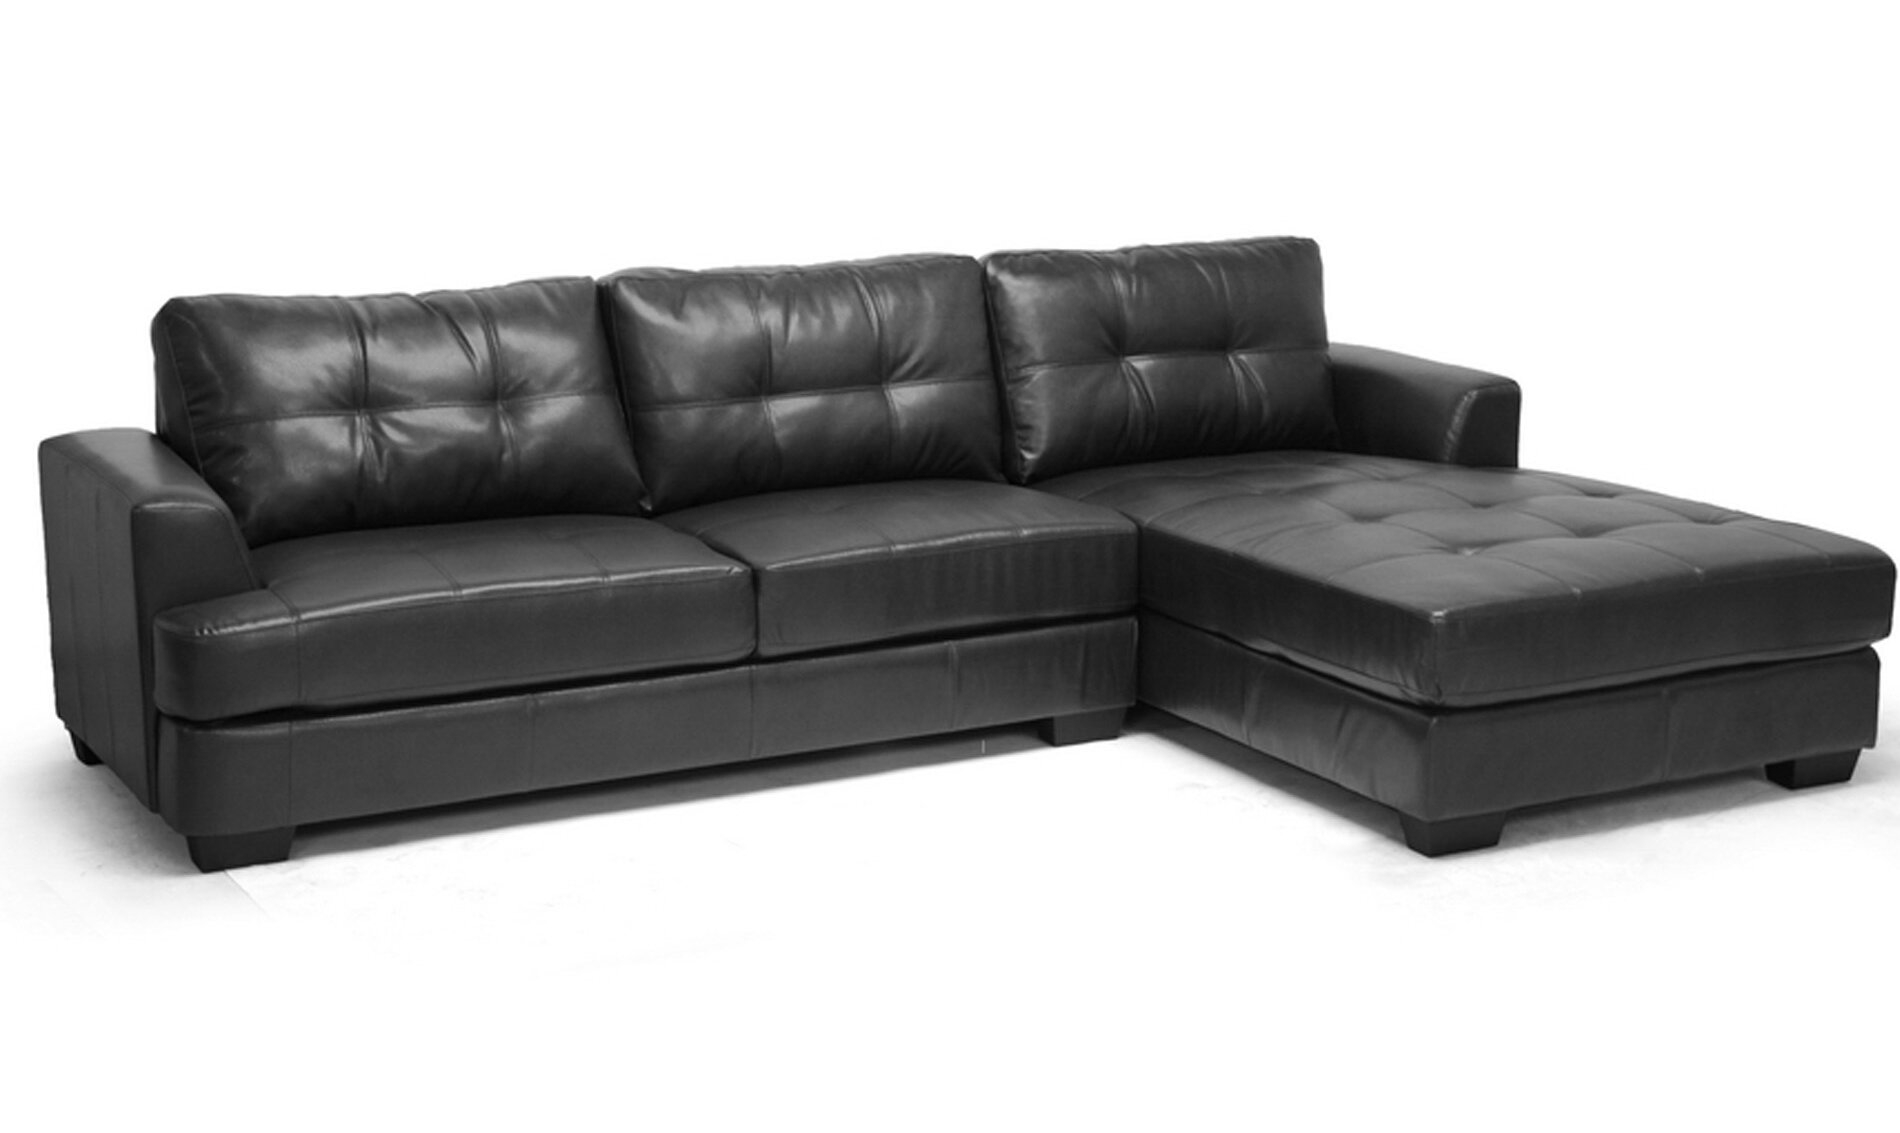 Baxton Studio Dobson Chaise Sectional